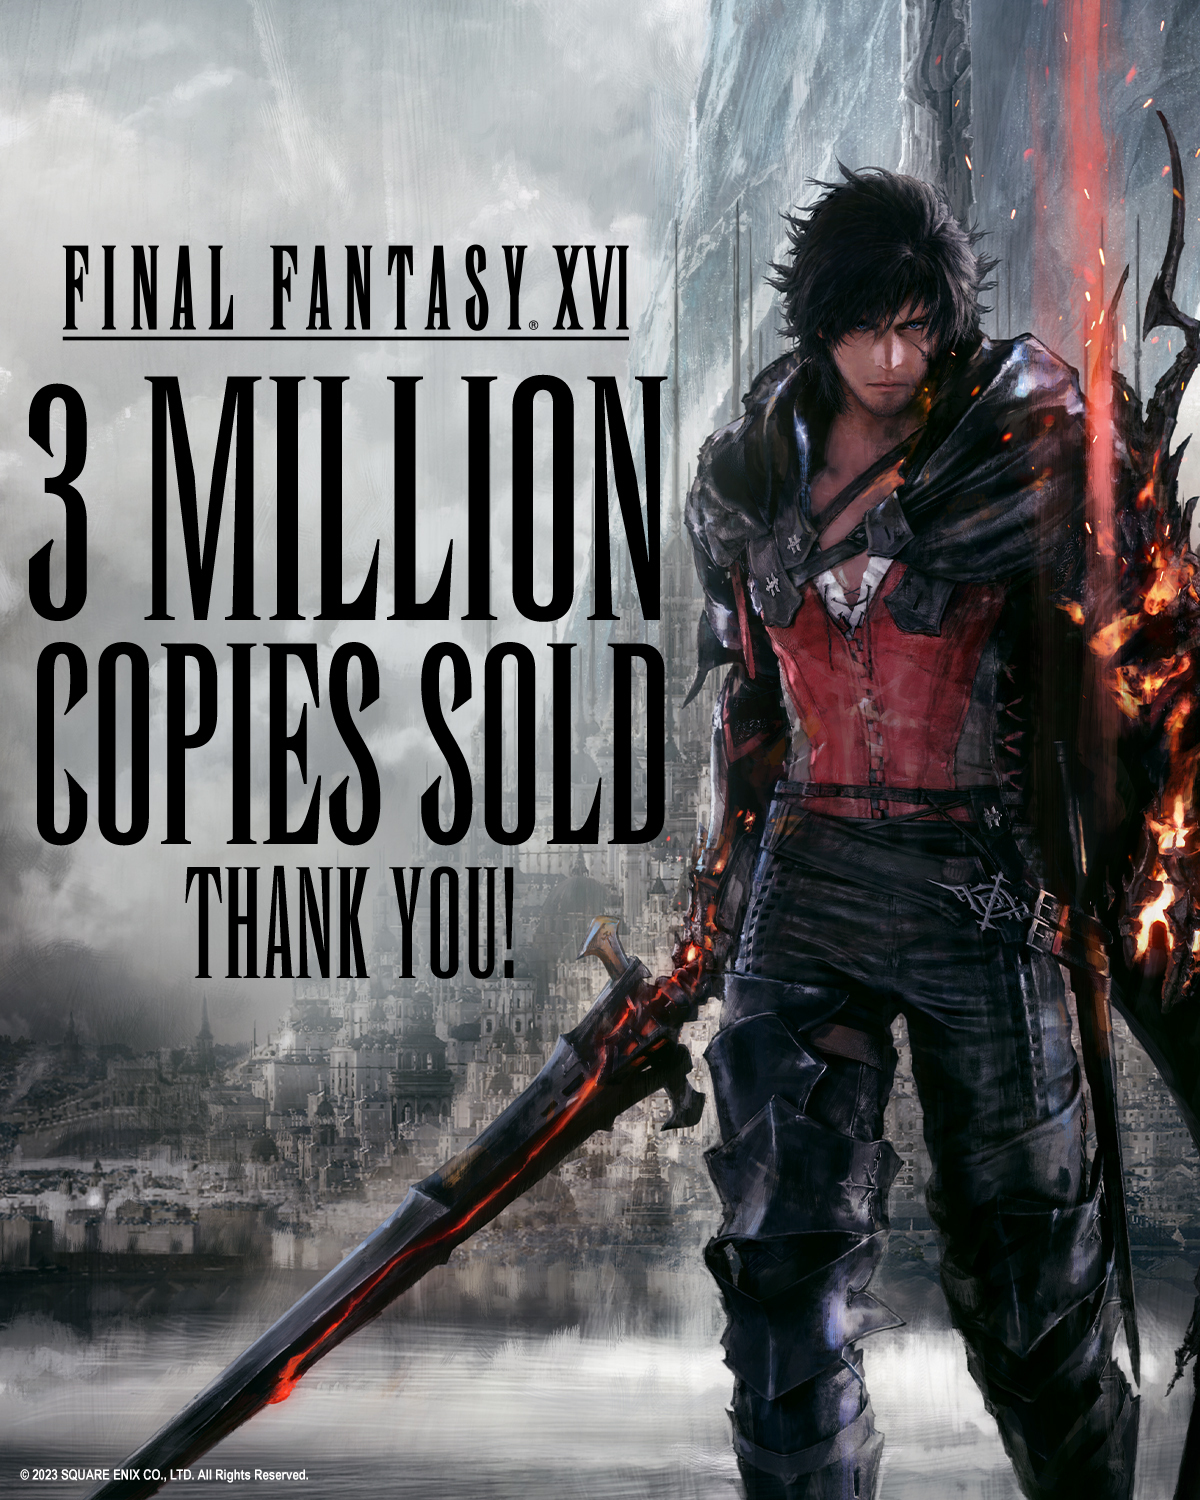 FINAL FANTASY XVI on X: We're delighted to announce we've shipped and  digitally sold 3 million copies of Final Fantasy XVI on PlayStation 5.  Thank you for your support! #FF16  /